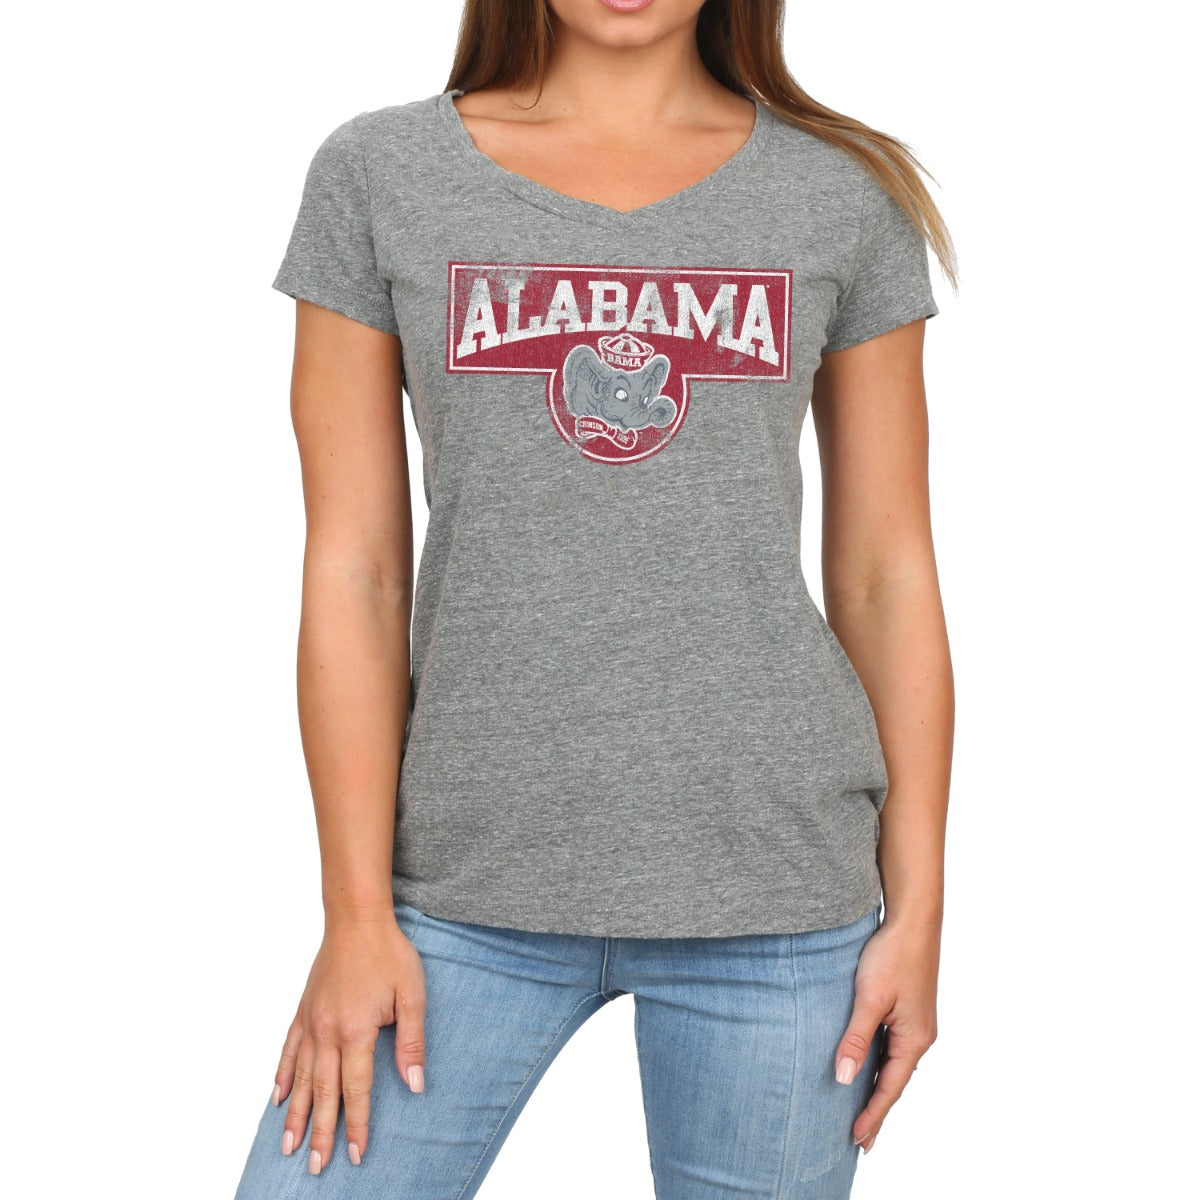 Alabama arch logo white with red border on tri--blend gray women's short sleeve tee